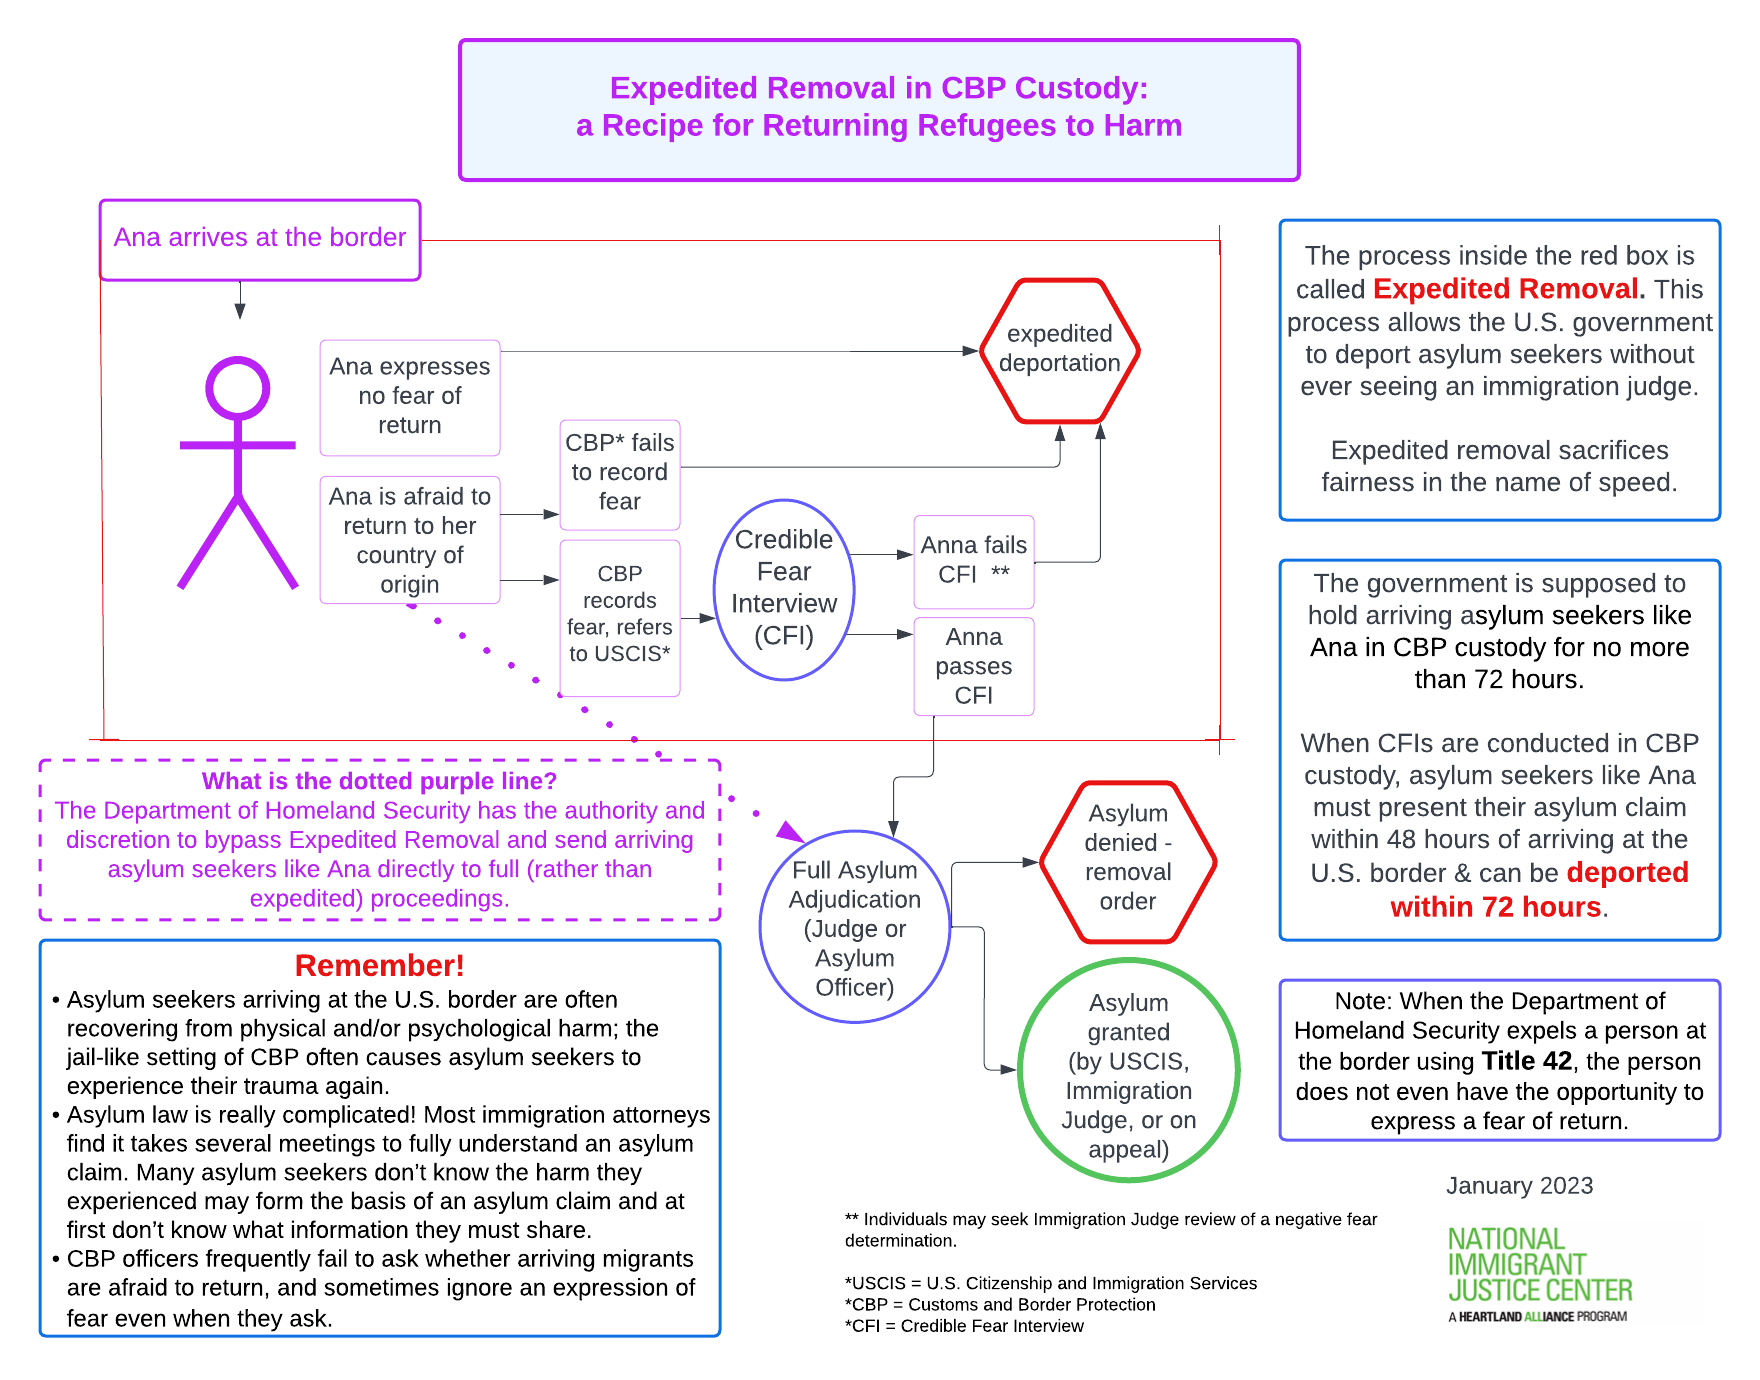 Flow chart showing the expedited removal process for an asylum seeker named Ana